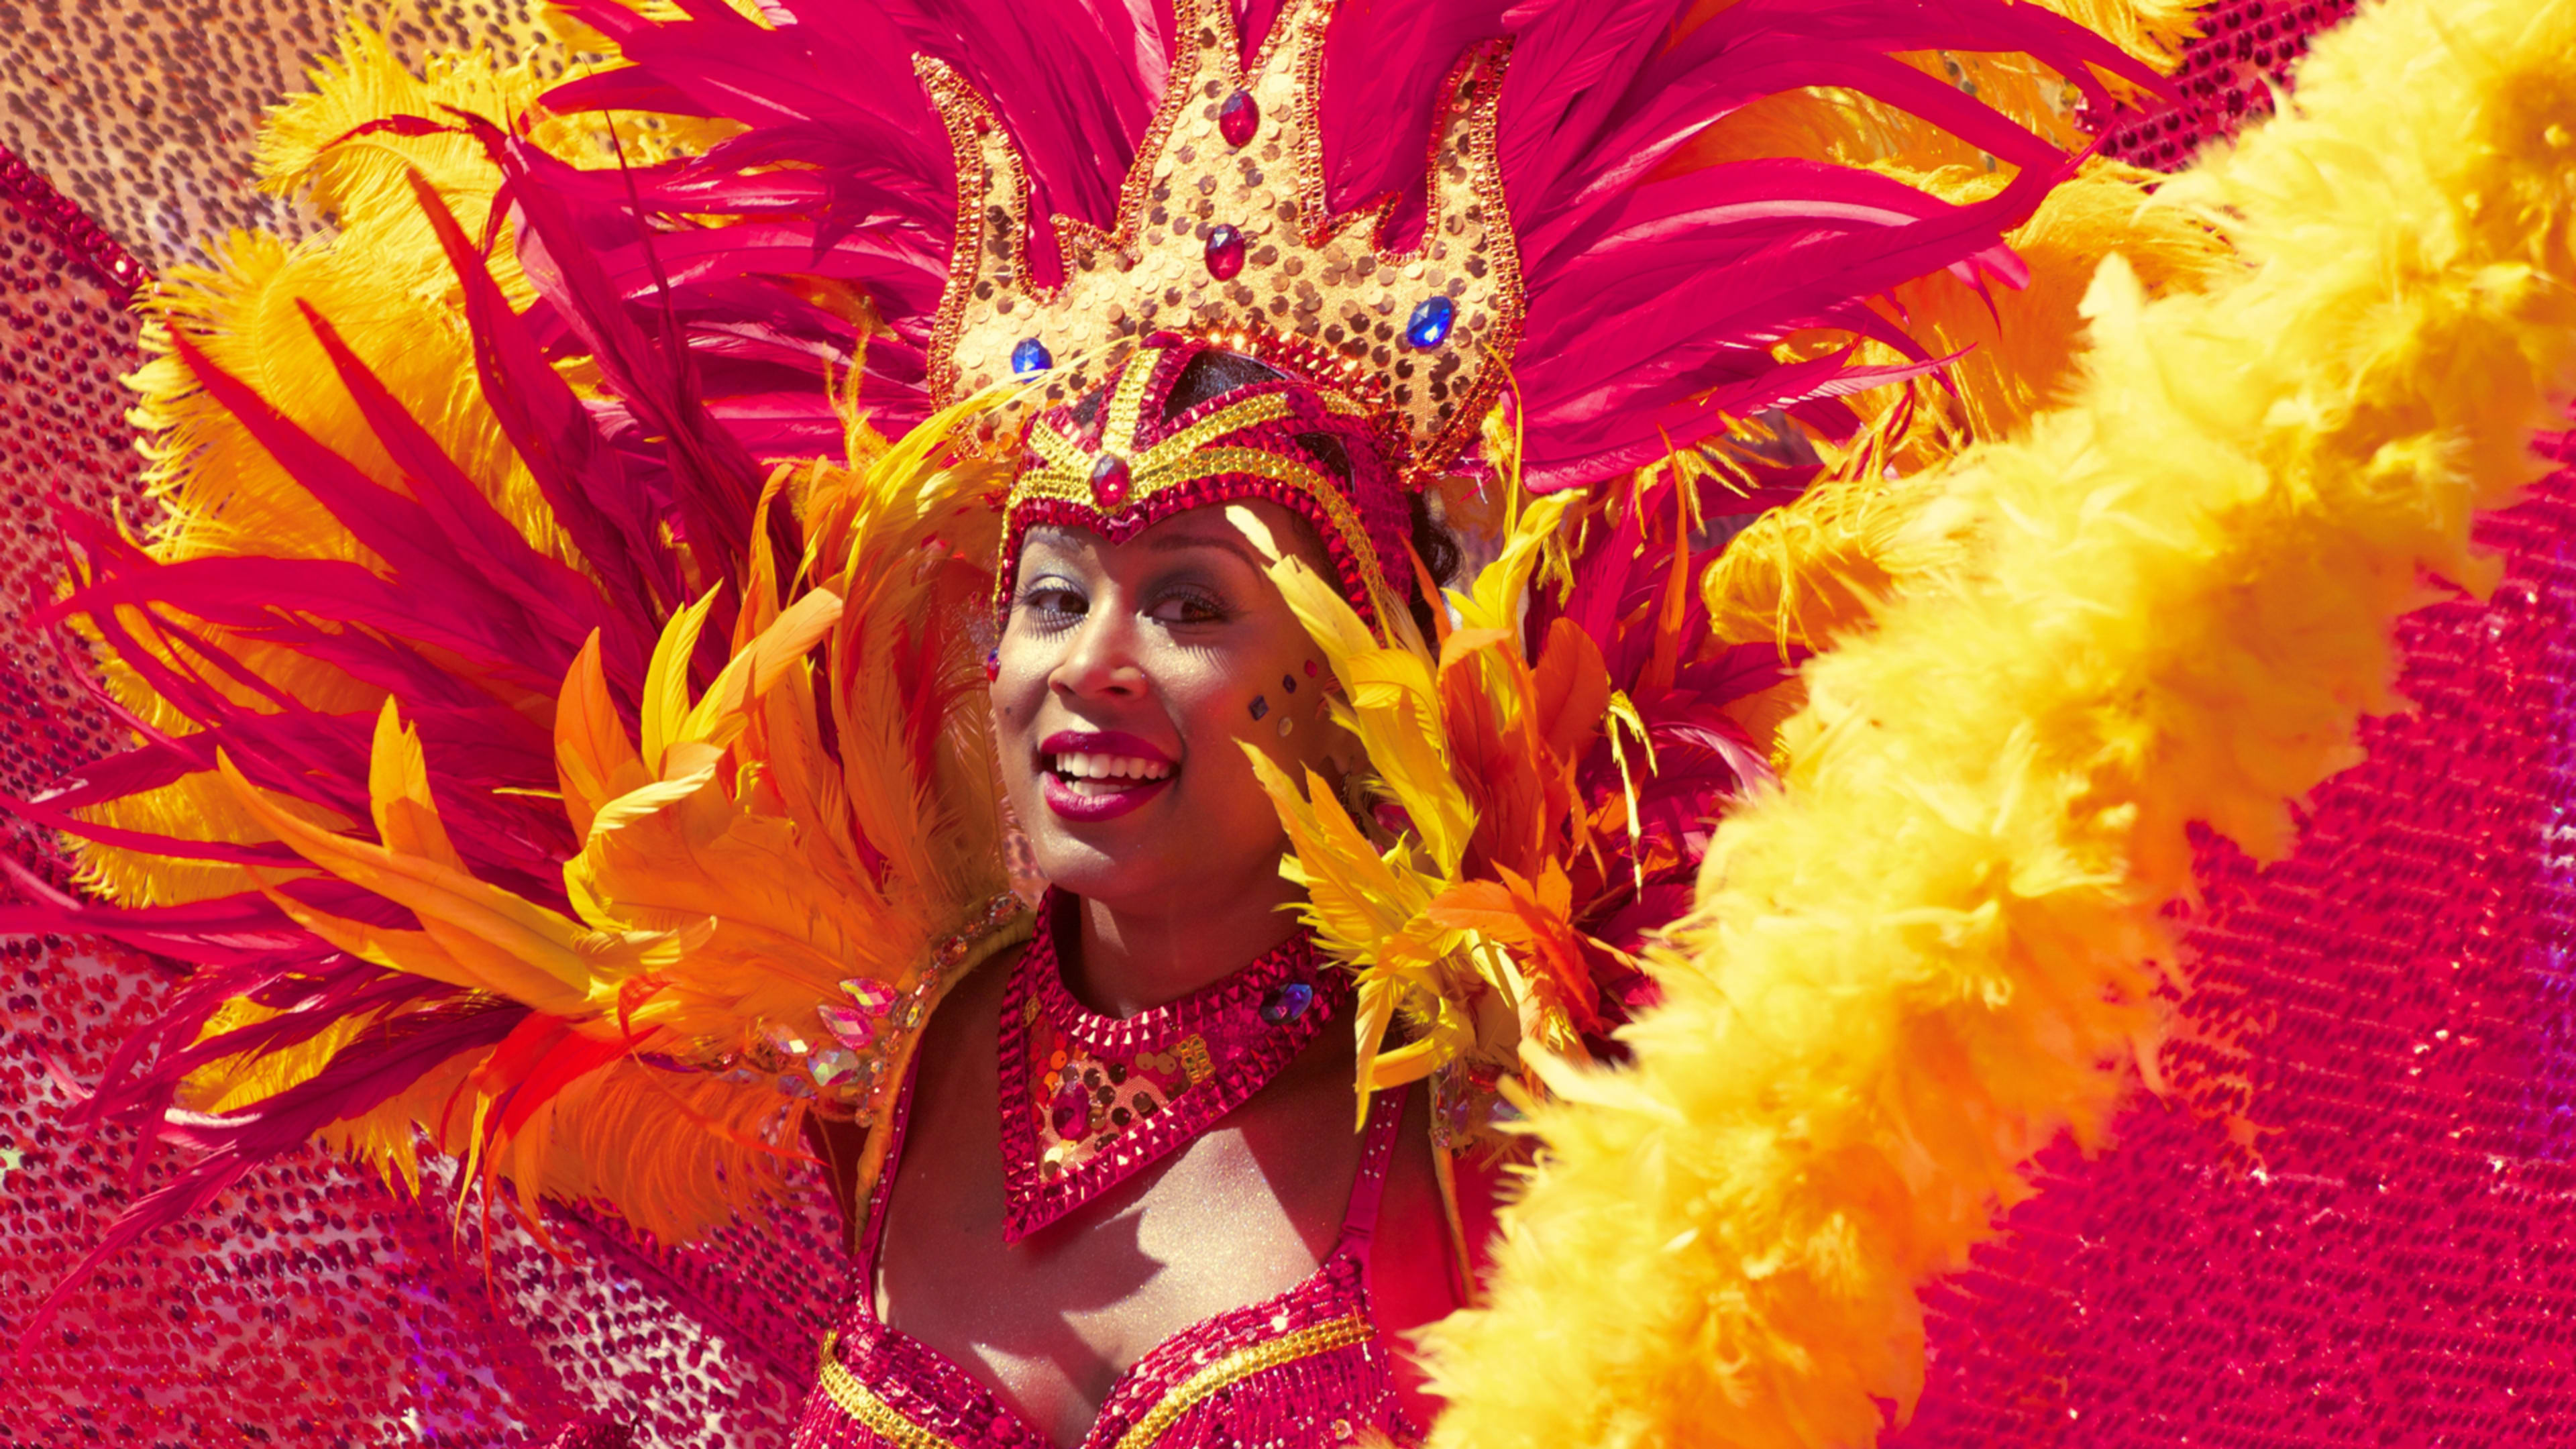 Brazil is using a facial recognition system during Rio’s Carnival